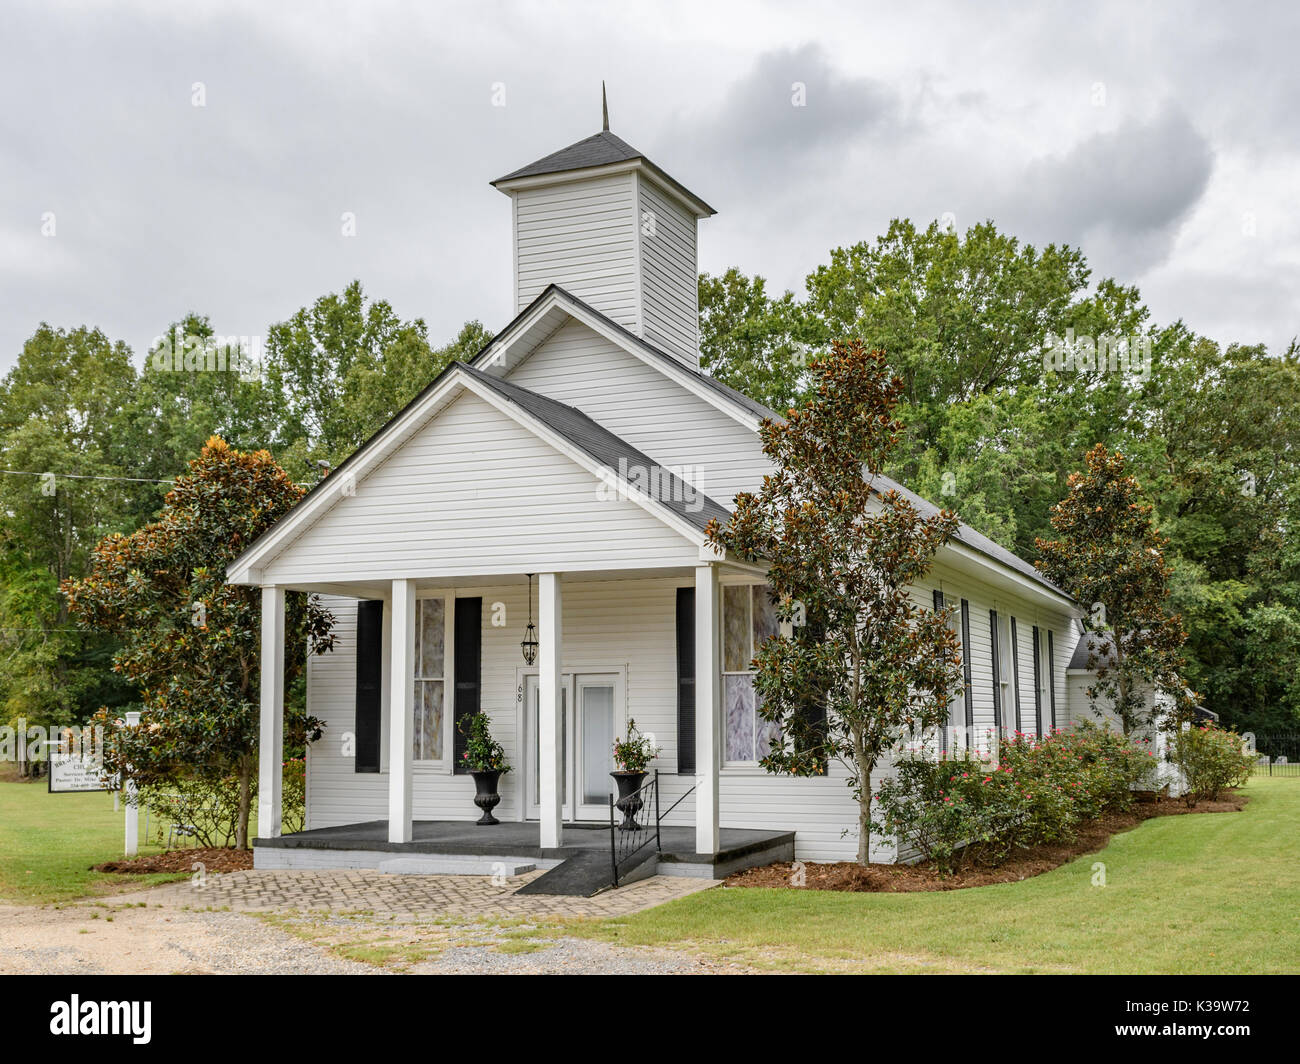 Brewer Memorial Church, another small rural white church in the southern USA, is located in Cecil, Alabama. Typical small Baptist church. Stock Photo